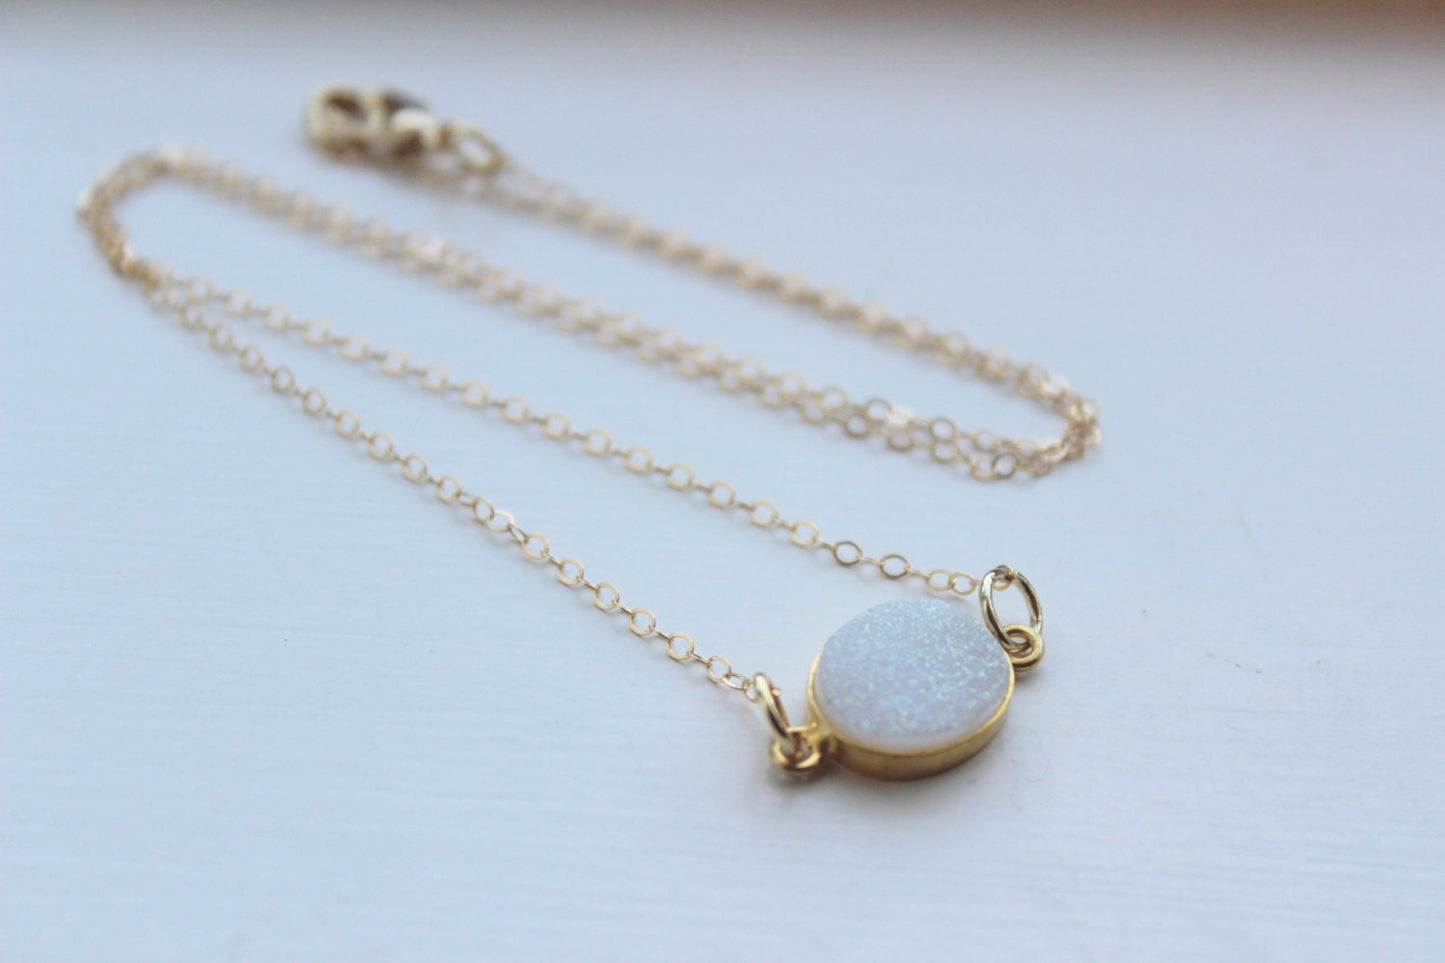 Gold White Opal Druzy Necklace Natural Druzy Jewelry - White Opal Drusy Necklace Druzy Christmas Gift Under 20 Necklace Statement Jewelry